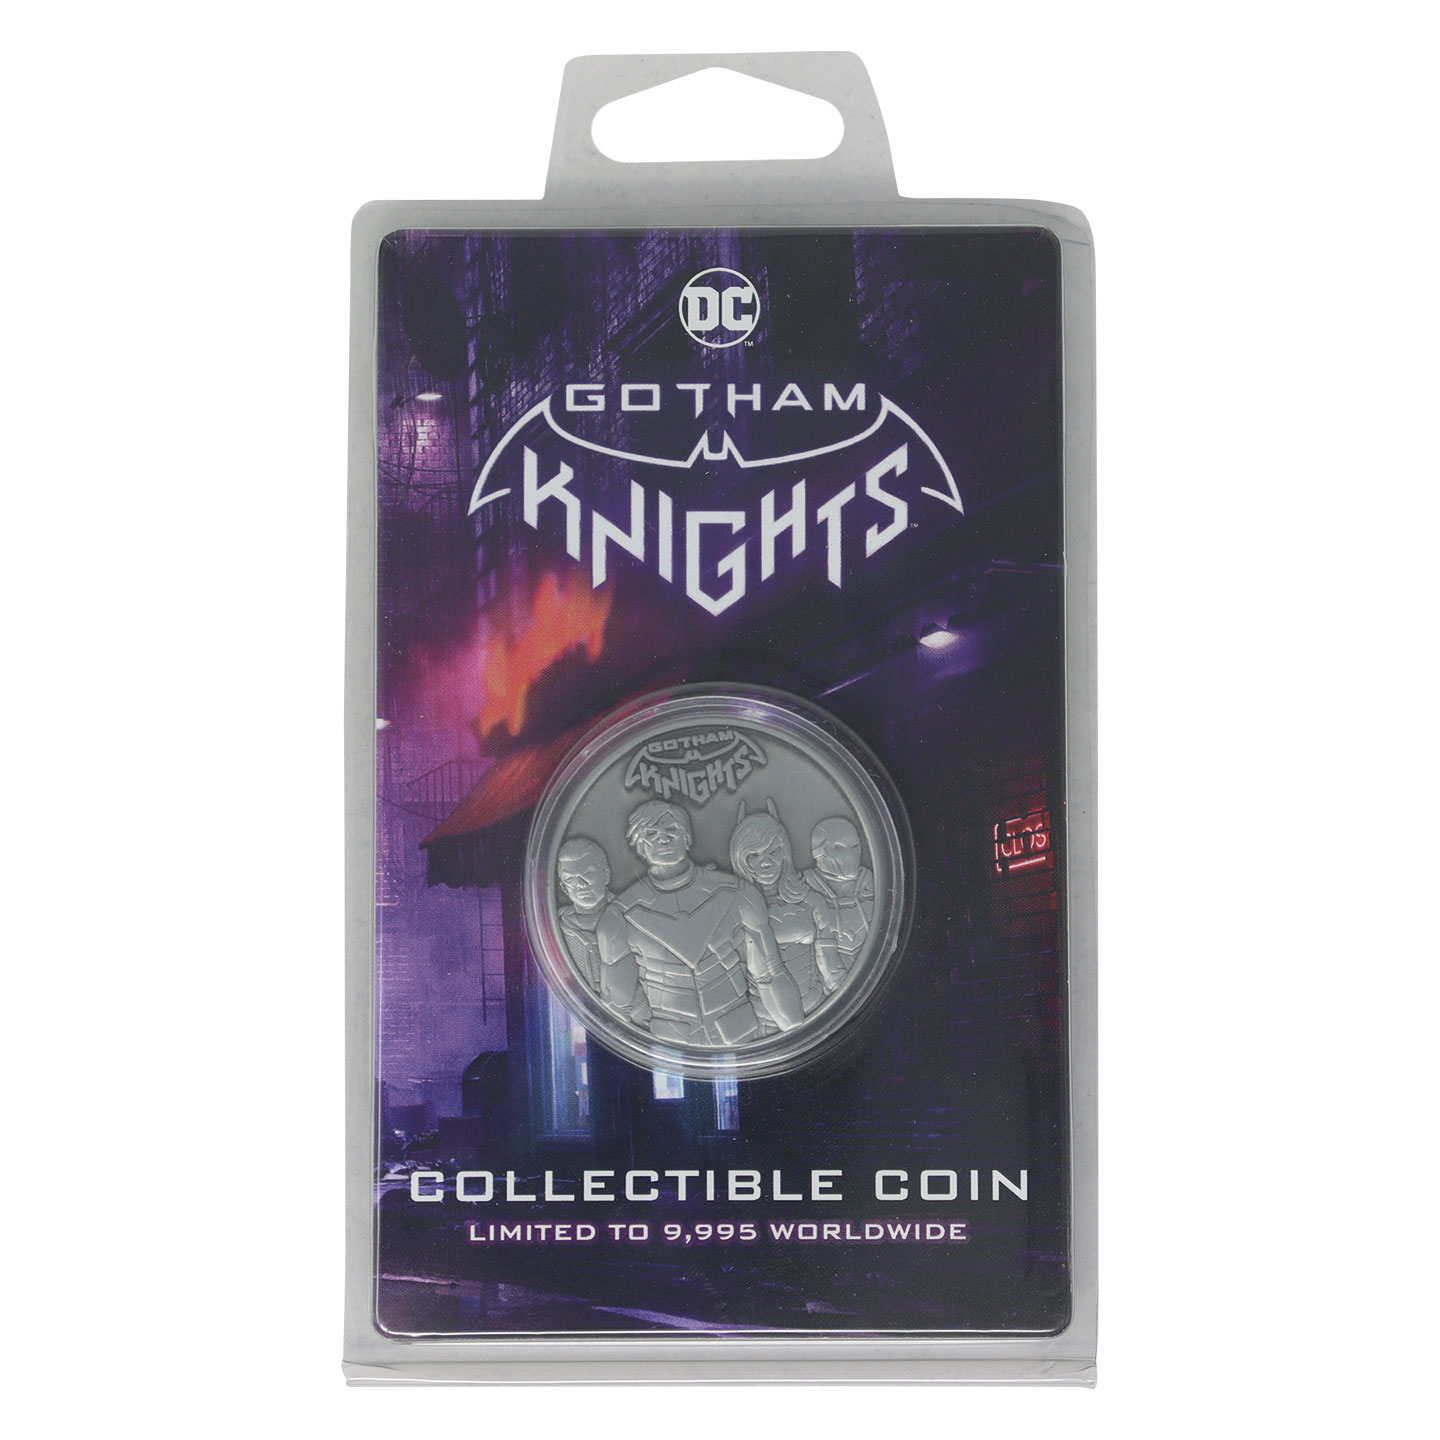 Gotham Knights Limited Edition Coin